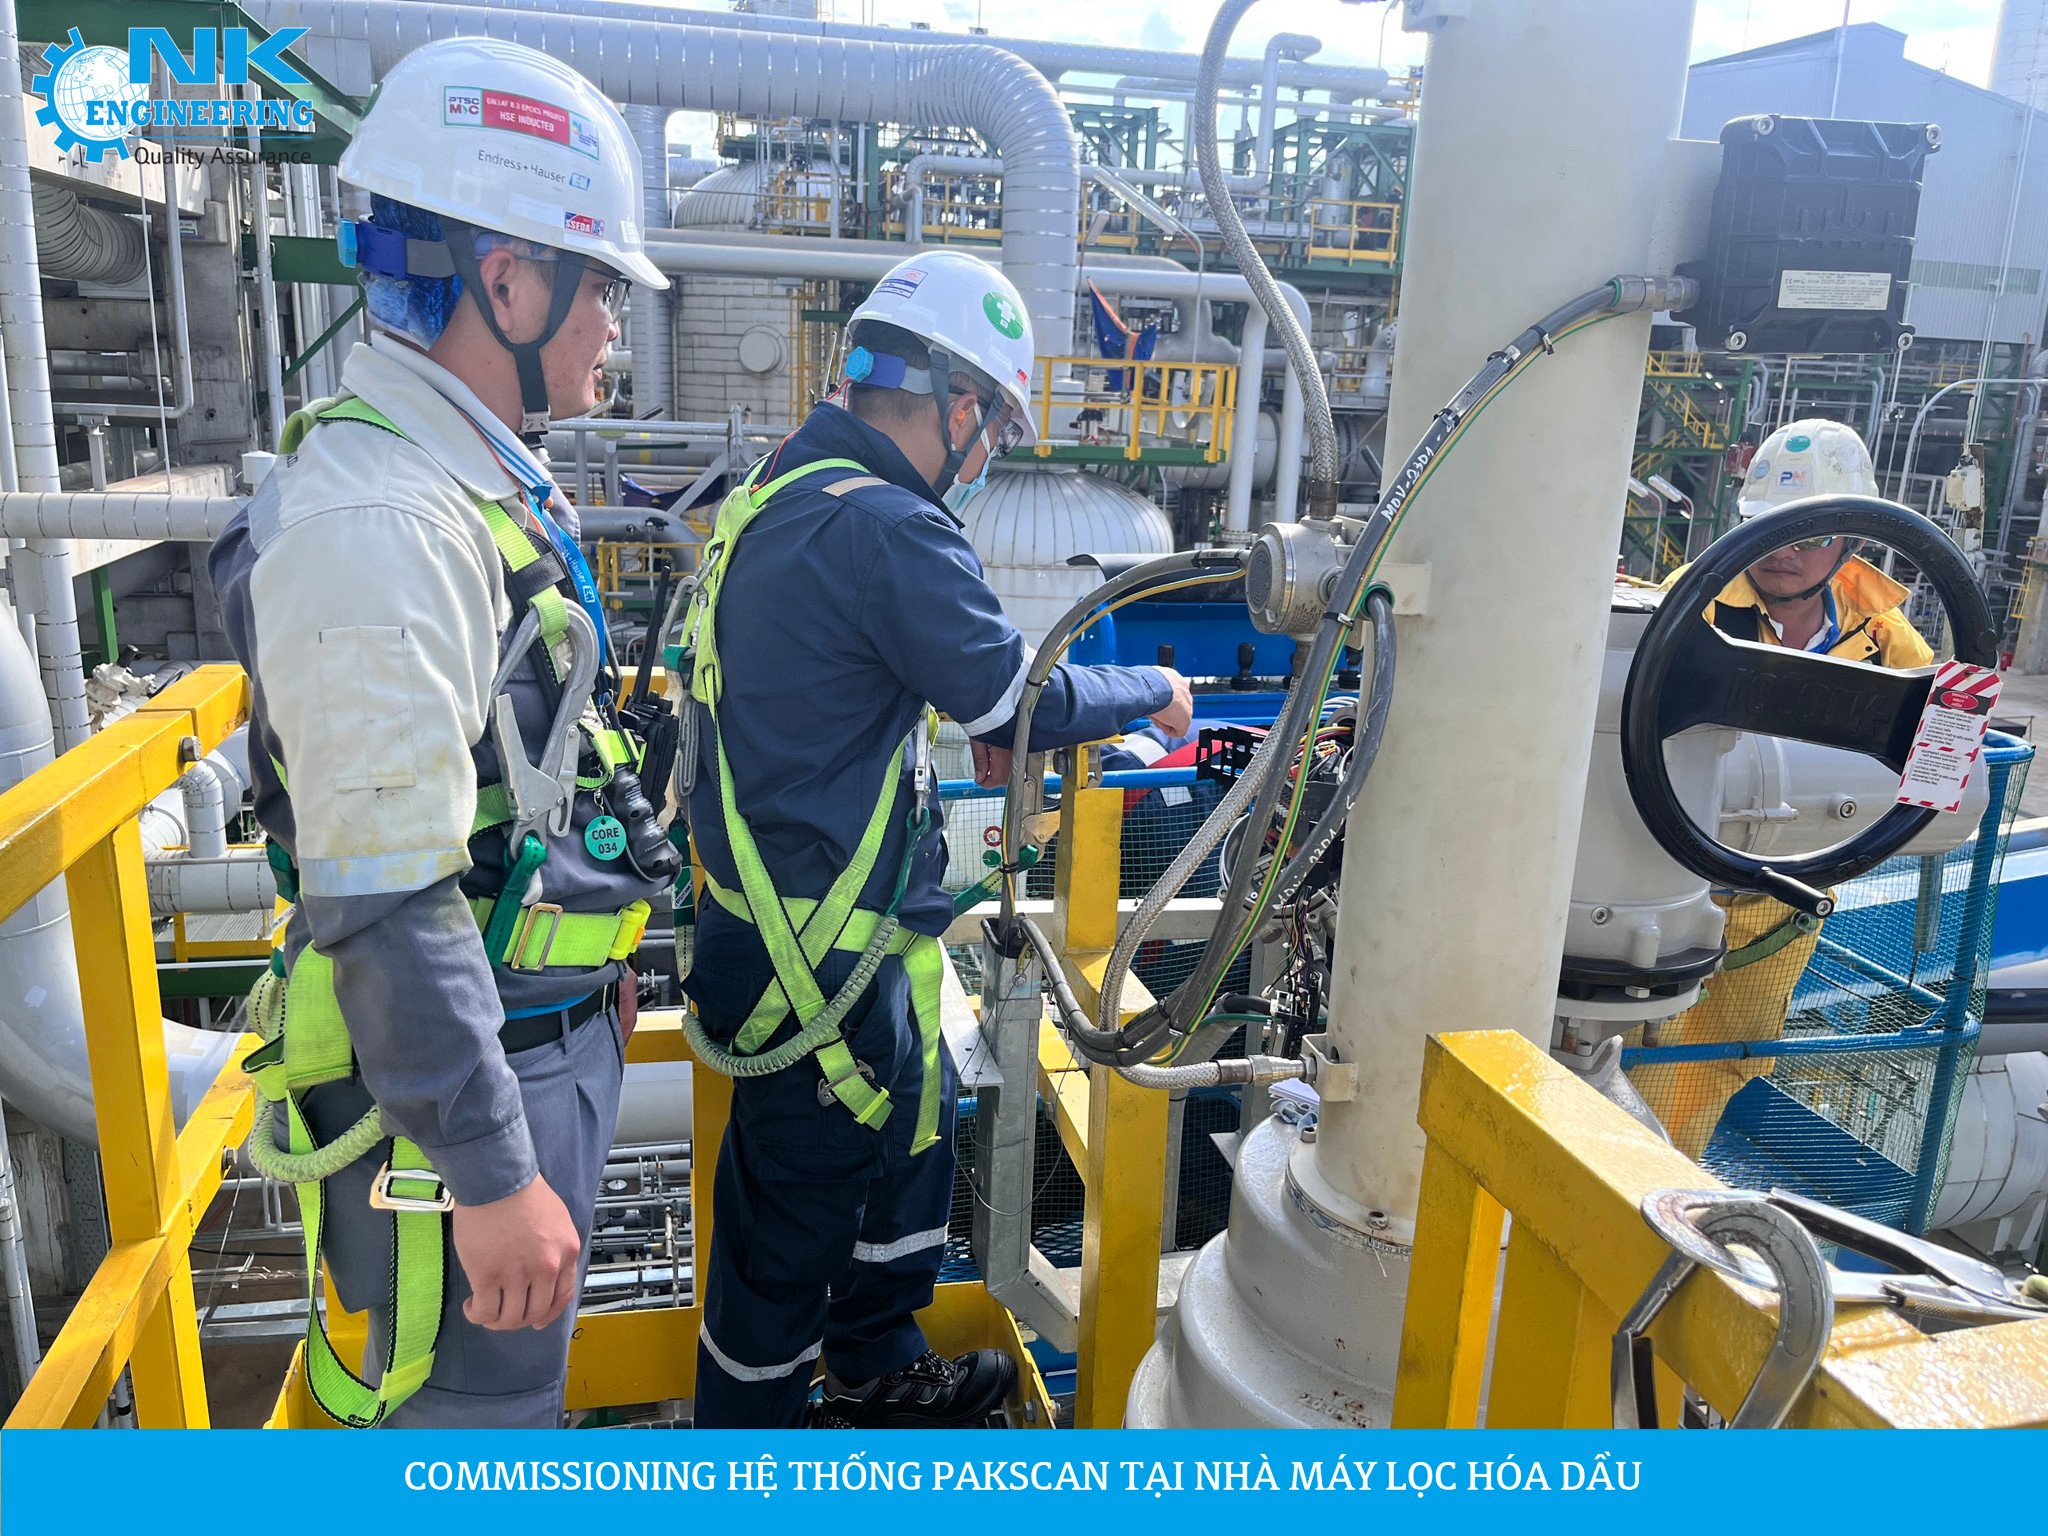 NK Engineering collaborated with Rotork experts to commissioning the Rotork Pakscan system at one of the largest petroleum refining complexes